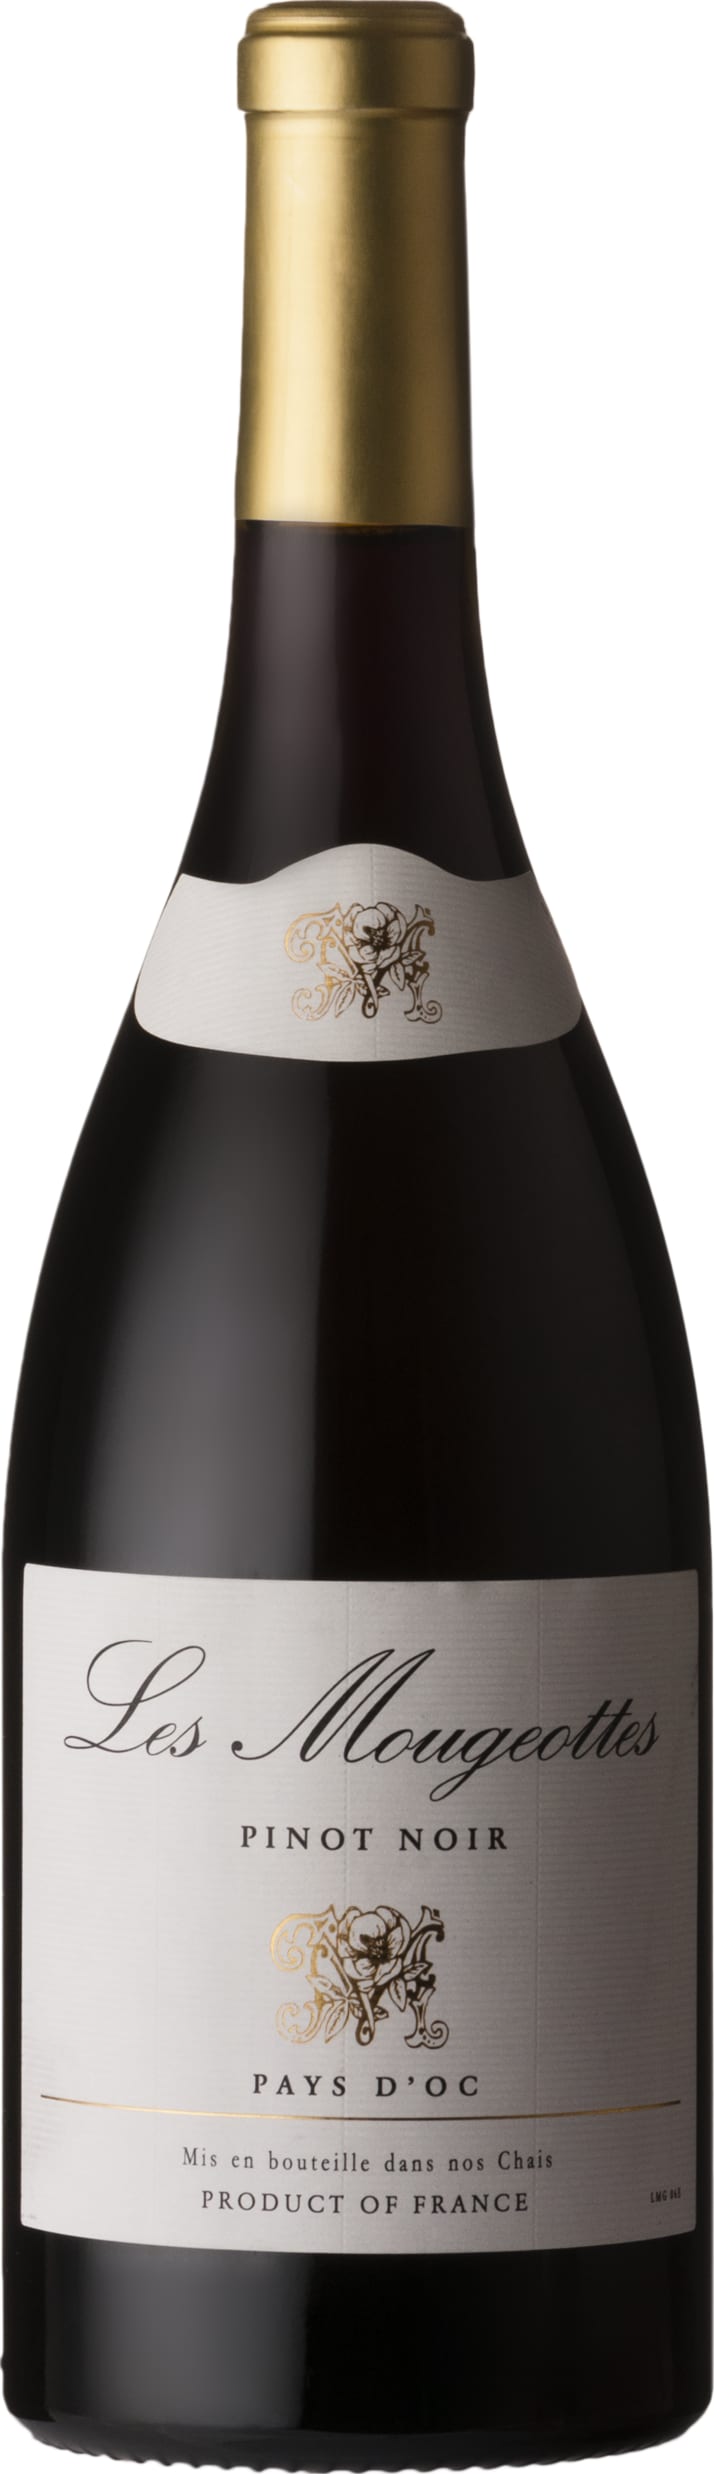 Les Mougeottes Les Mougeottes Pinot Noir 2022 75cl - Buy Les Mougeottes Wines from GREAT WINES DIRECT wine shop